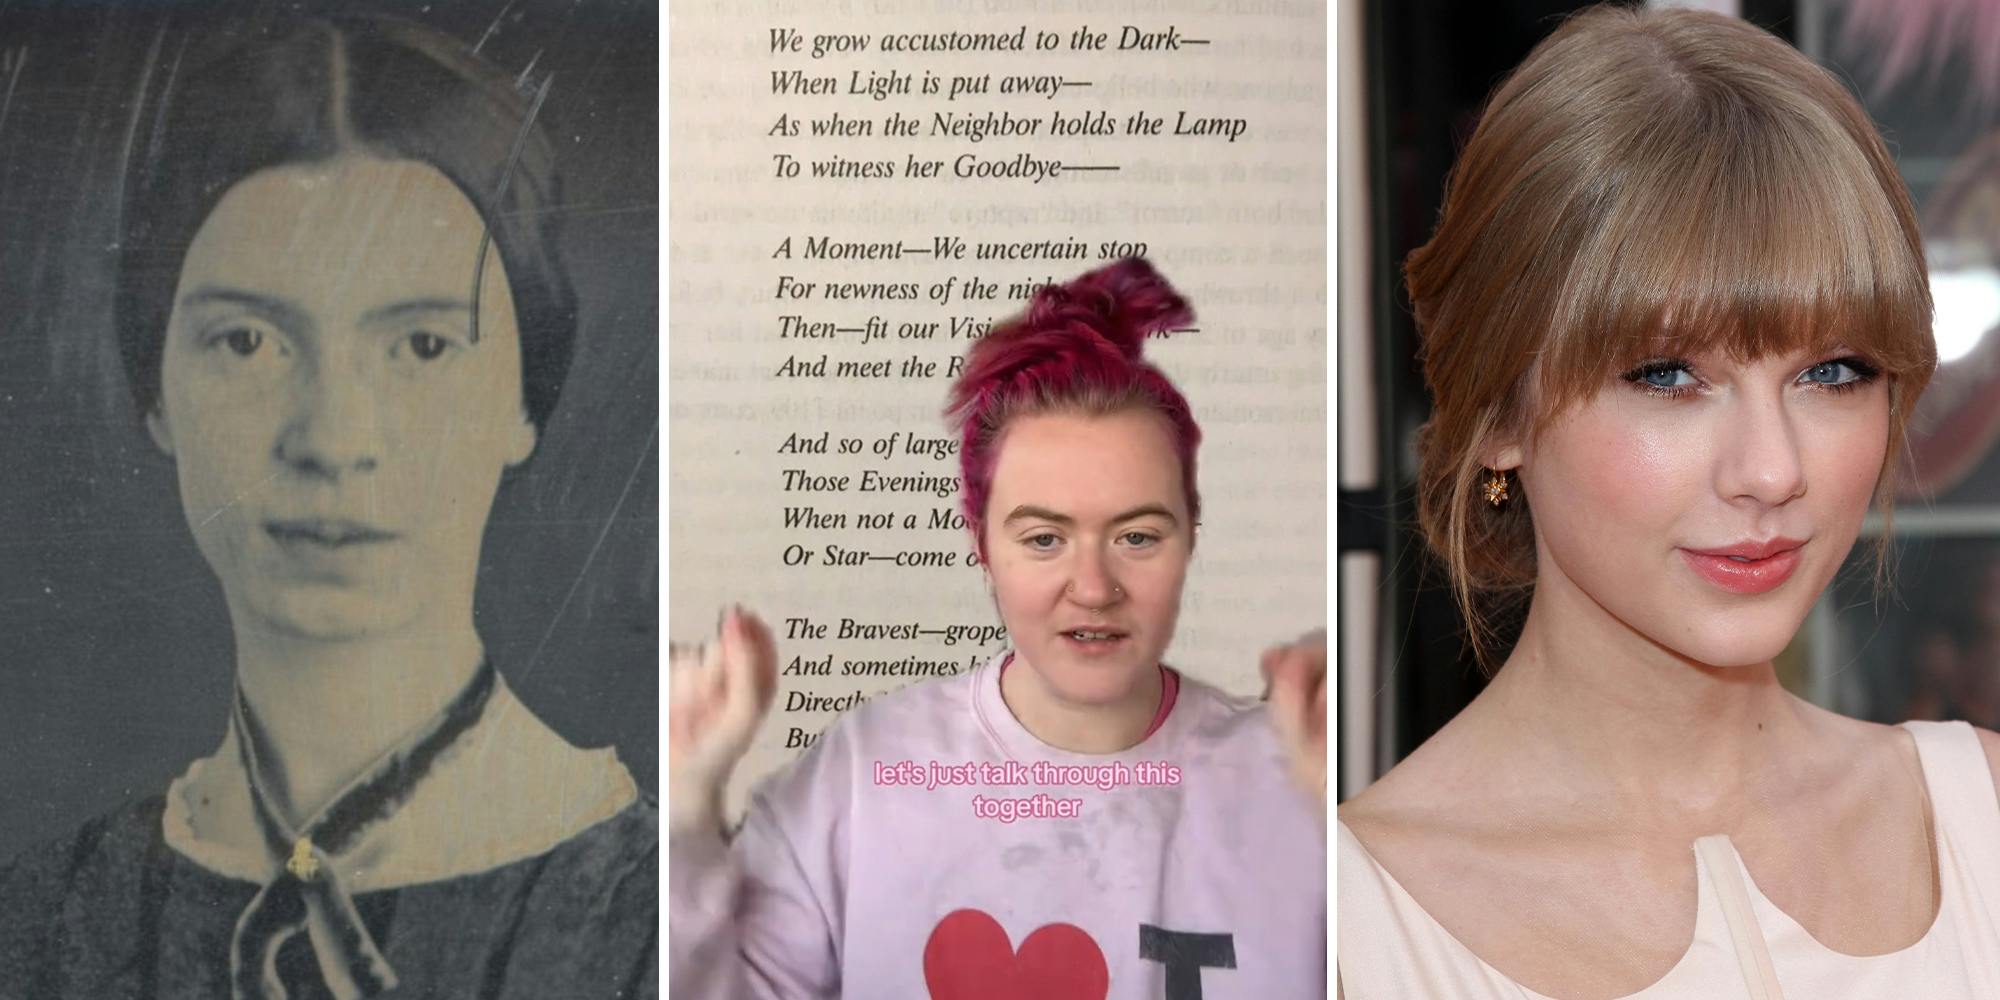 Emily Dickinson and Taylor Swift are related. Here's how fans say she influenced her work